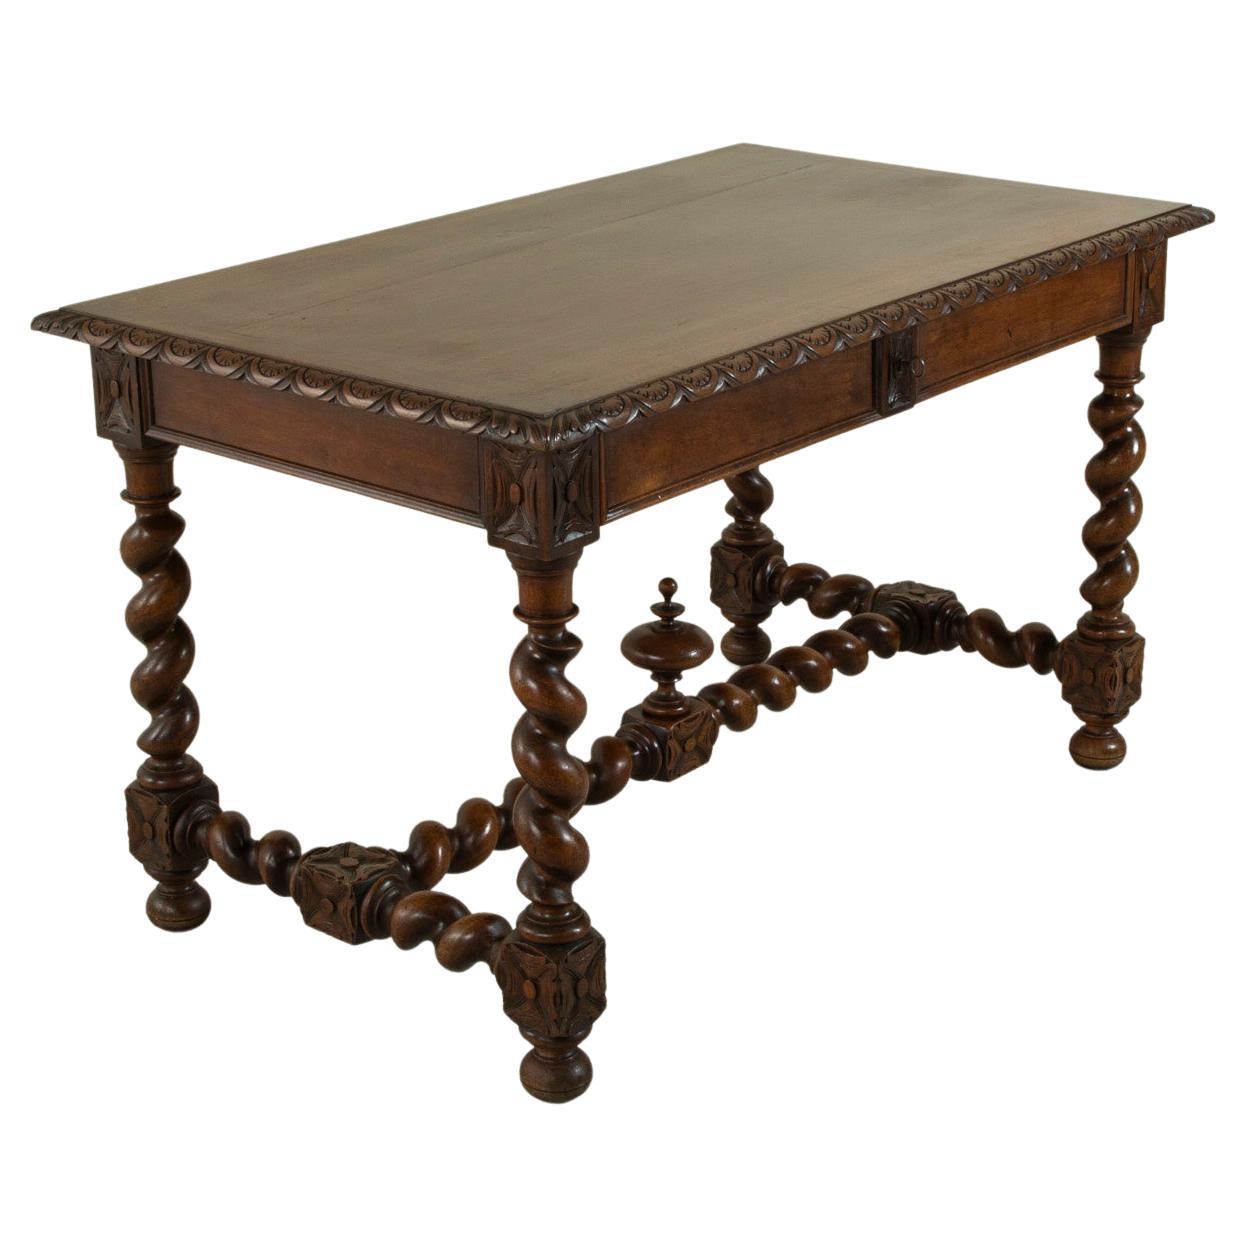 Late 19th Century French Louis XIII Style Hand Carved Walnut Desk, Writing Table